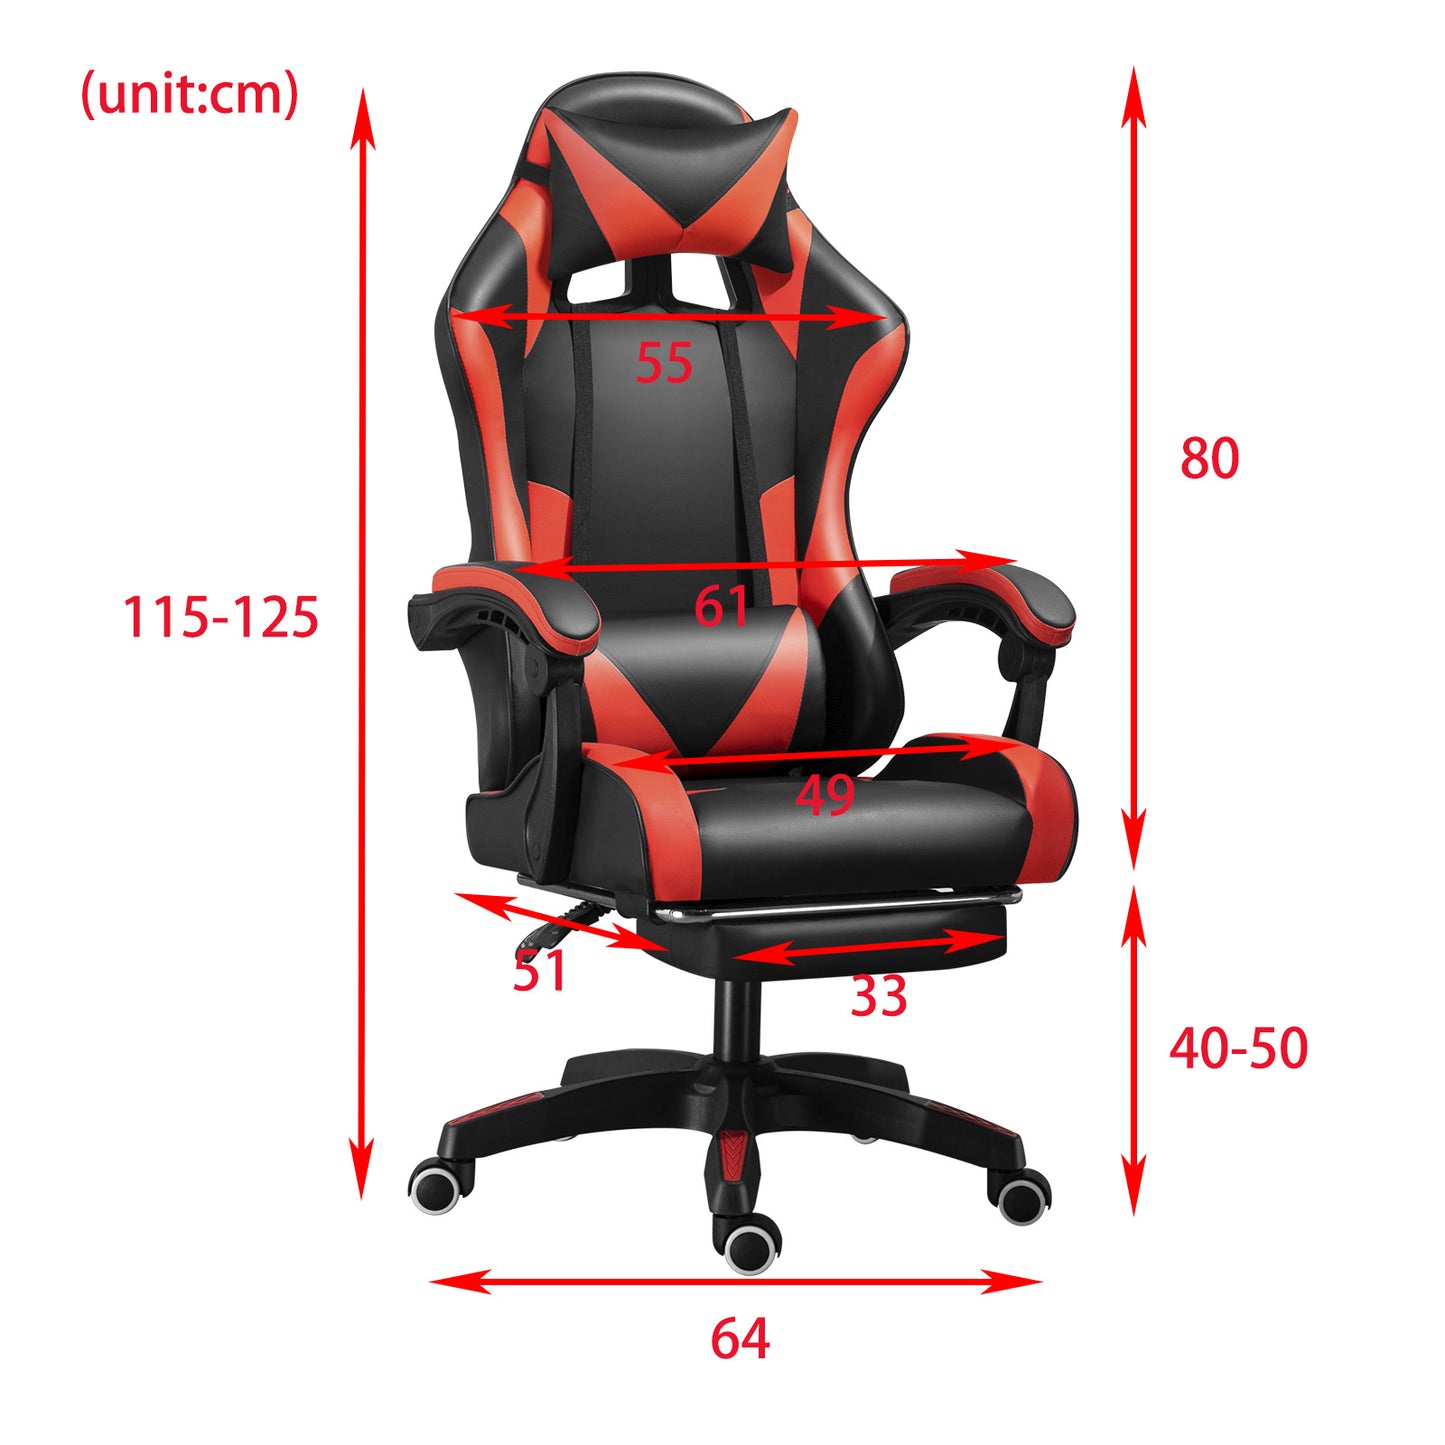 PU gaming chair, swivel recliner with adjustable backrest and seat height, high back gaming chair with footrest, office chair with 360° swivel, suitable for office or gaming